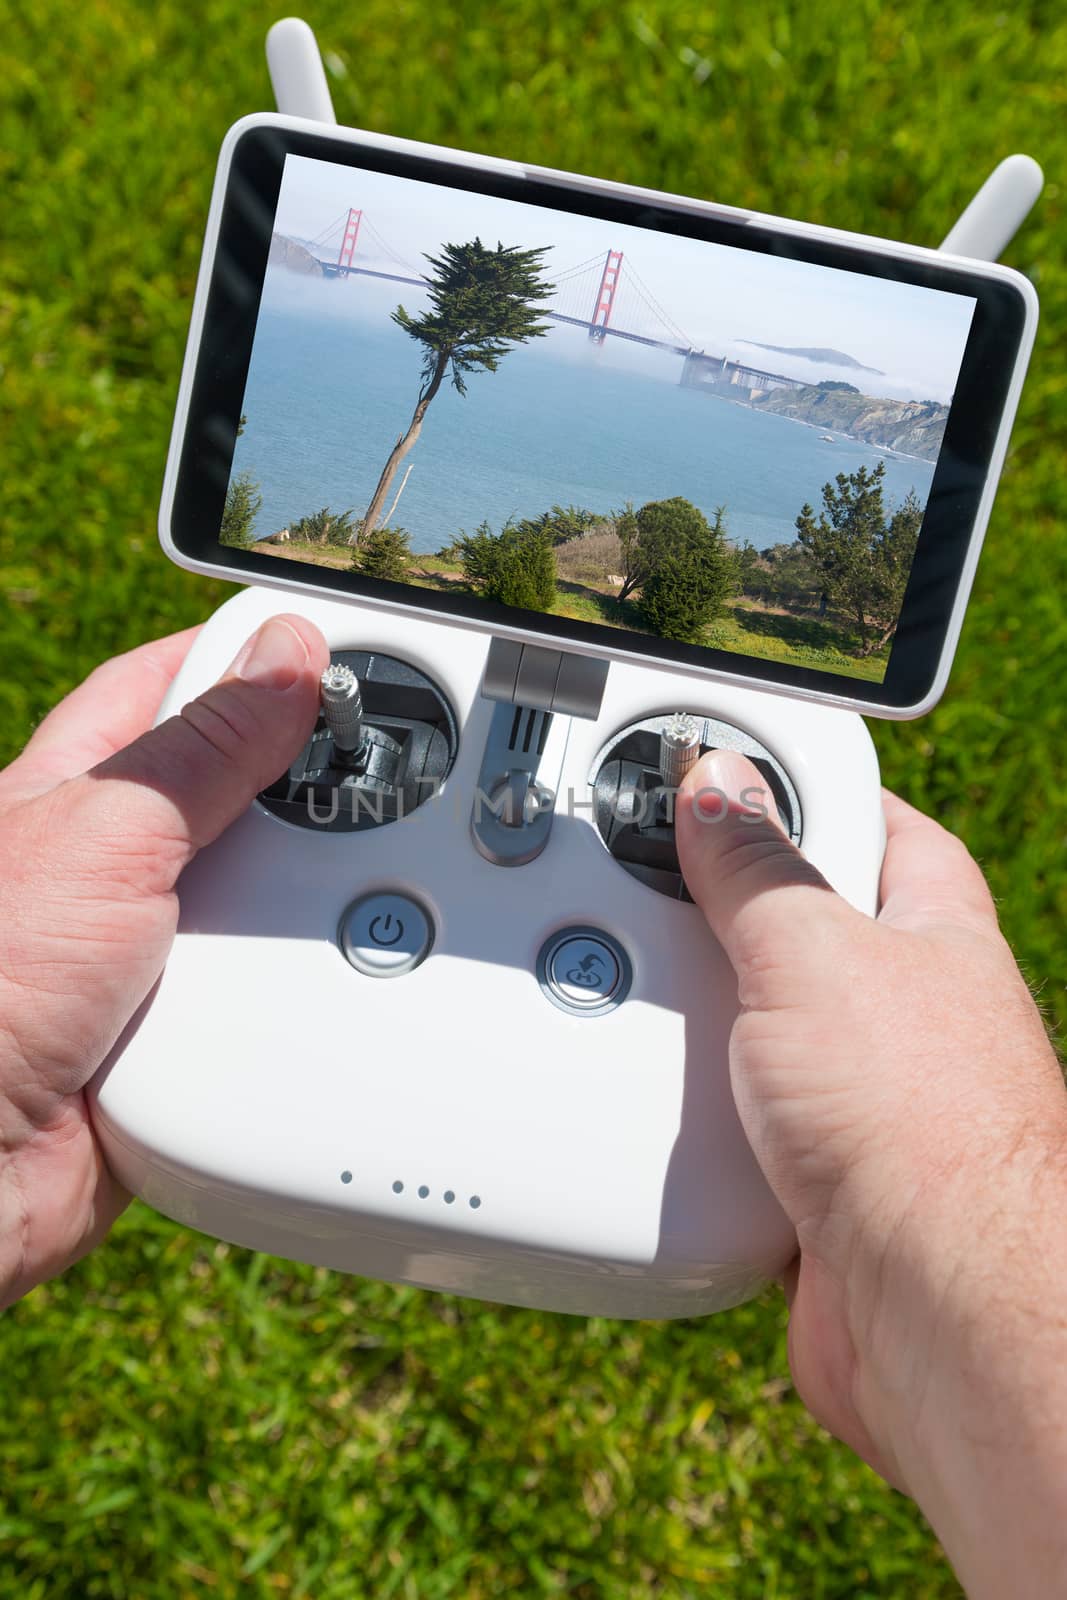 Hands Holding Drone Quadcopter Controller With Golden Gate Bridge View on Screen.